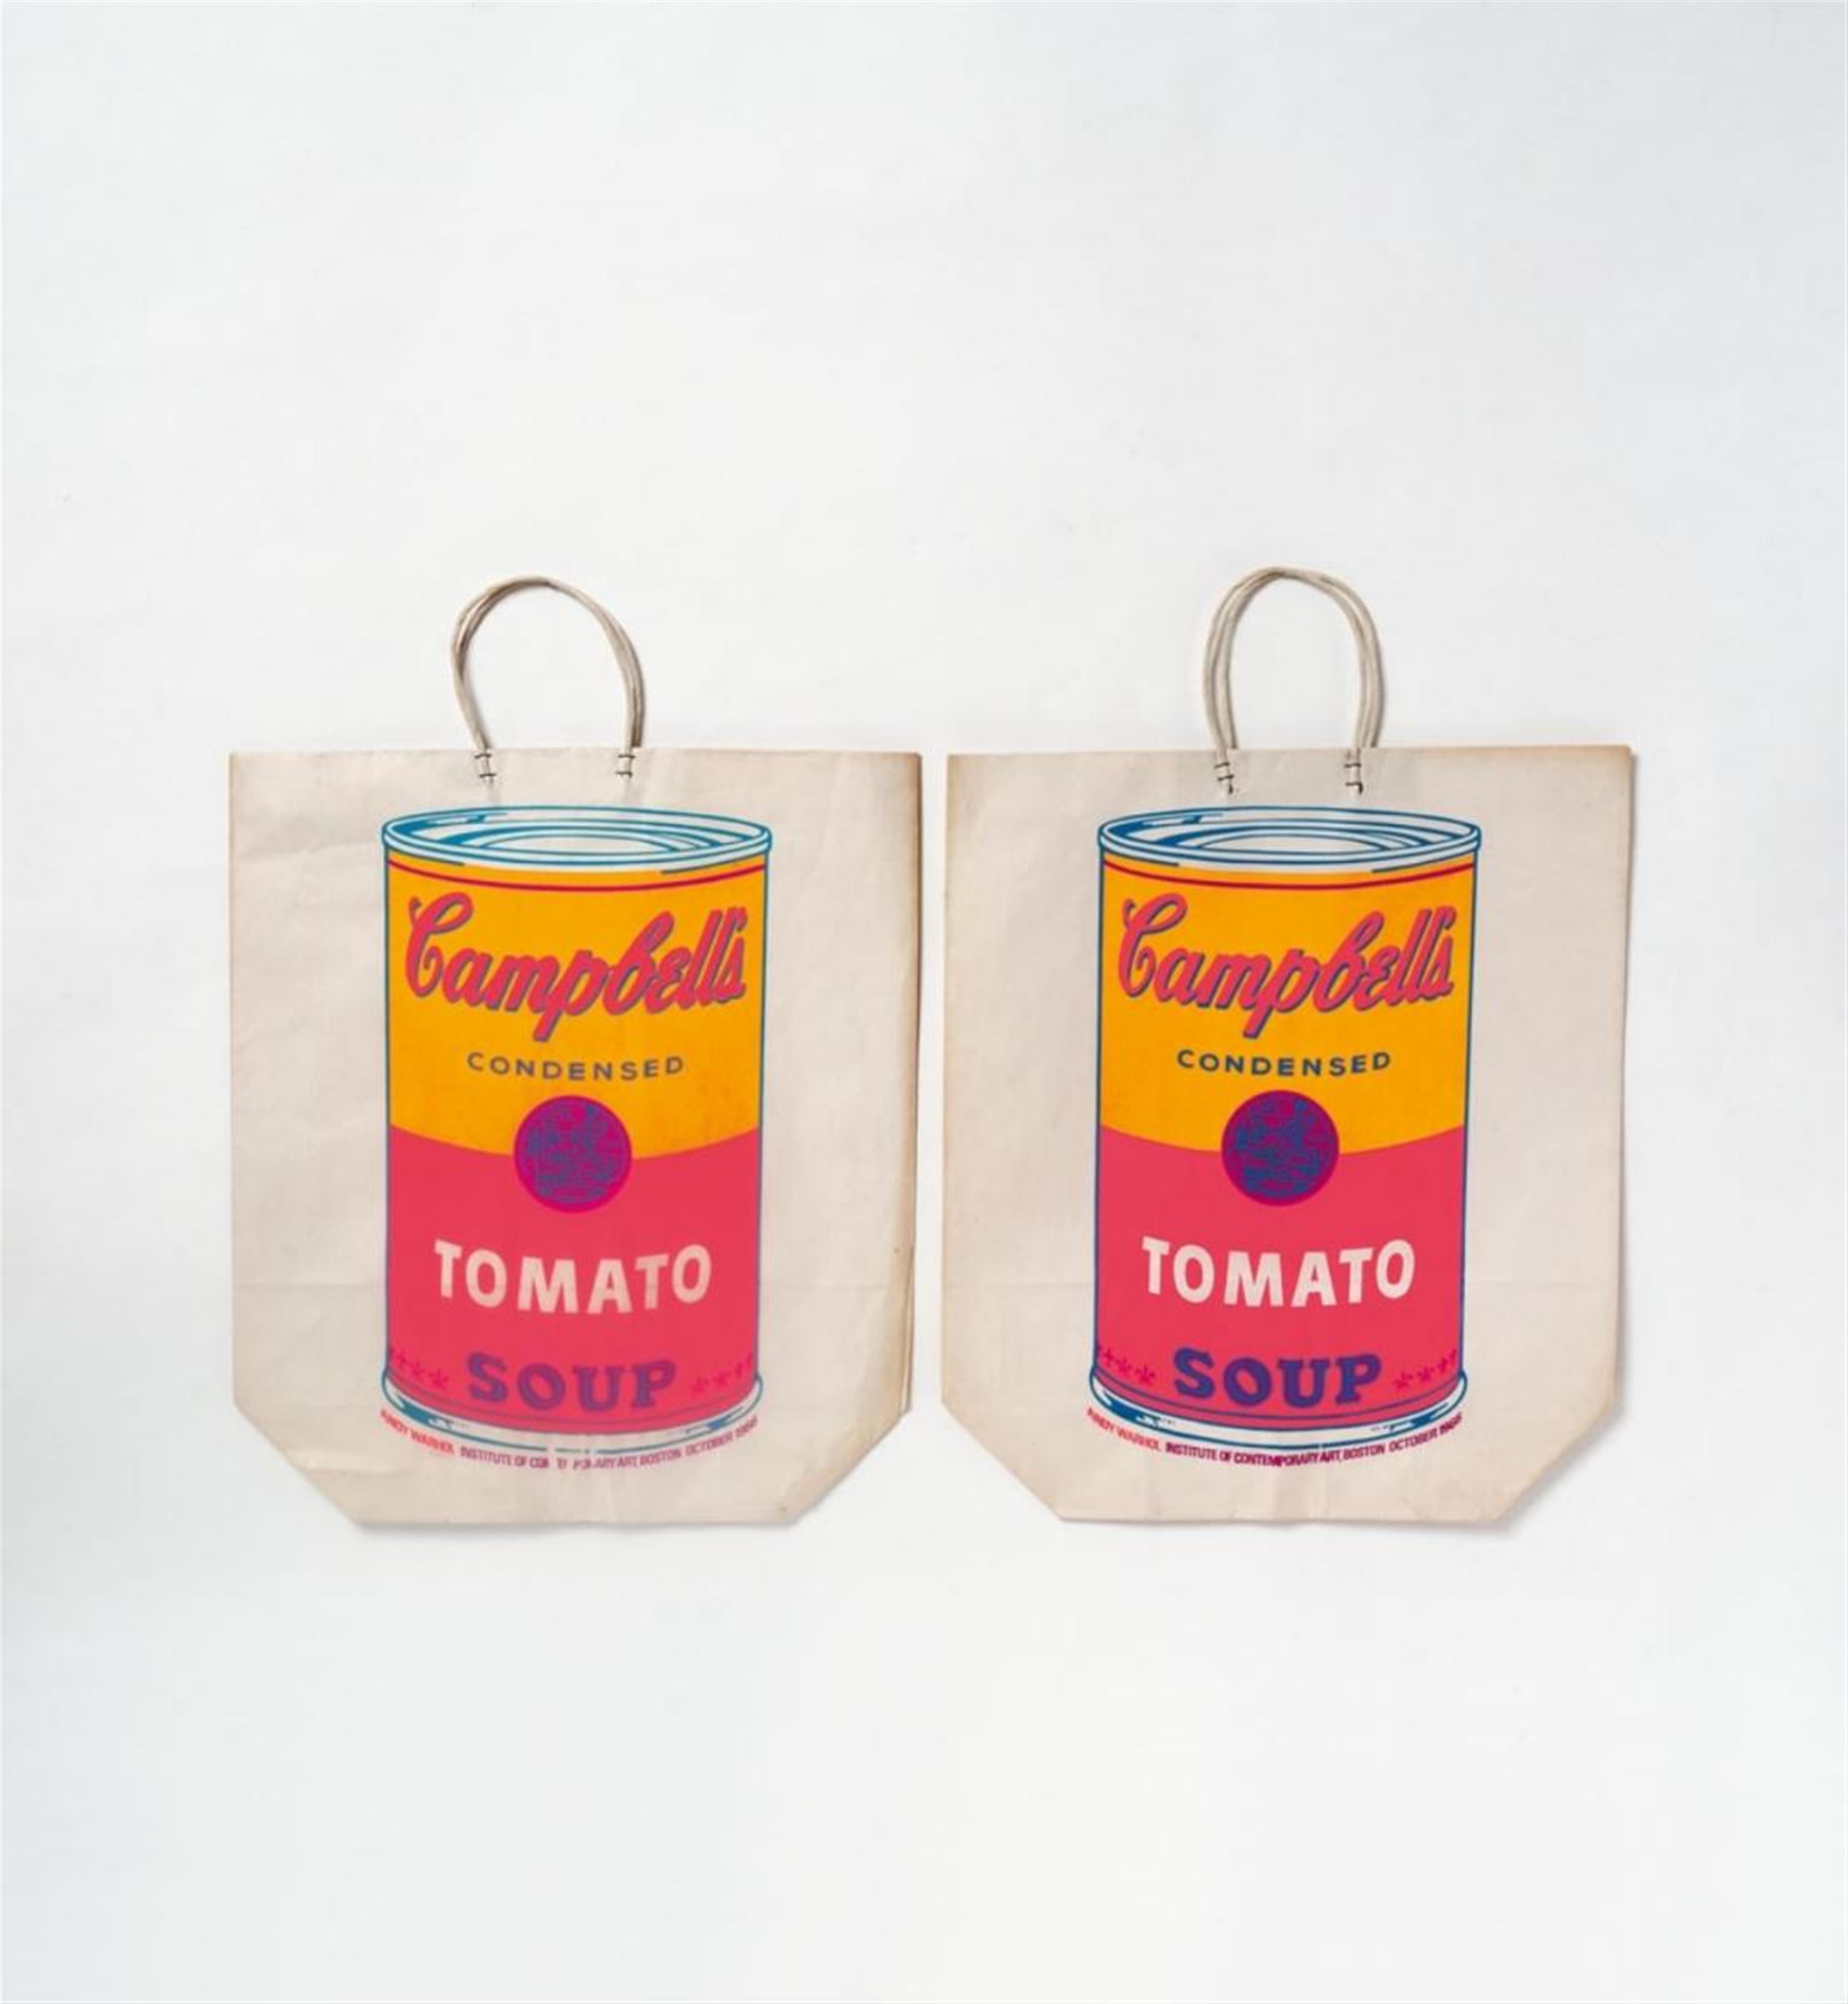 Andy Warhol - Campbell's Soup - image-1